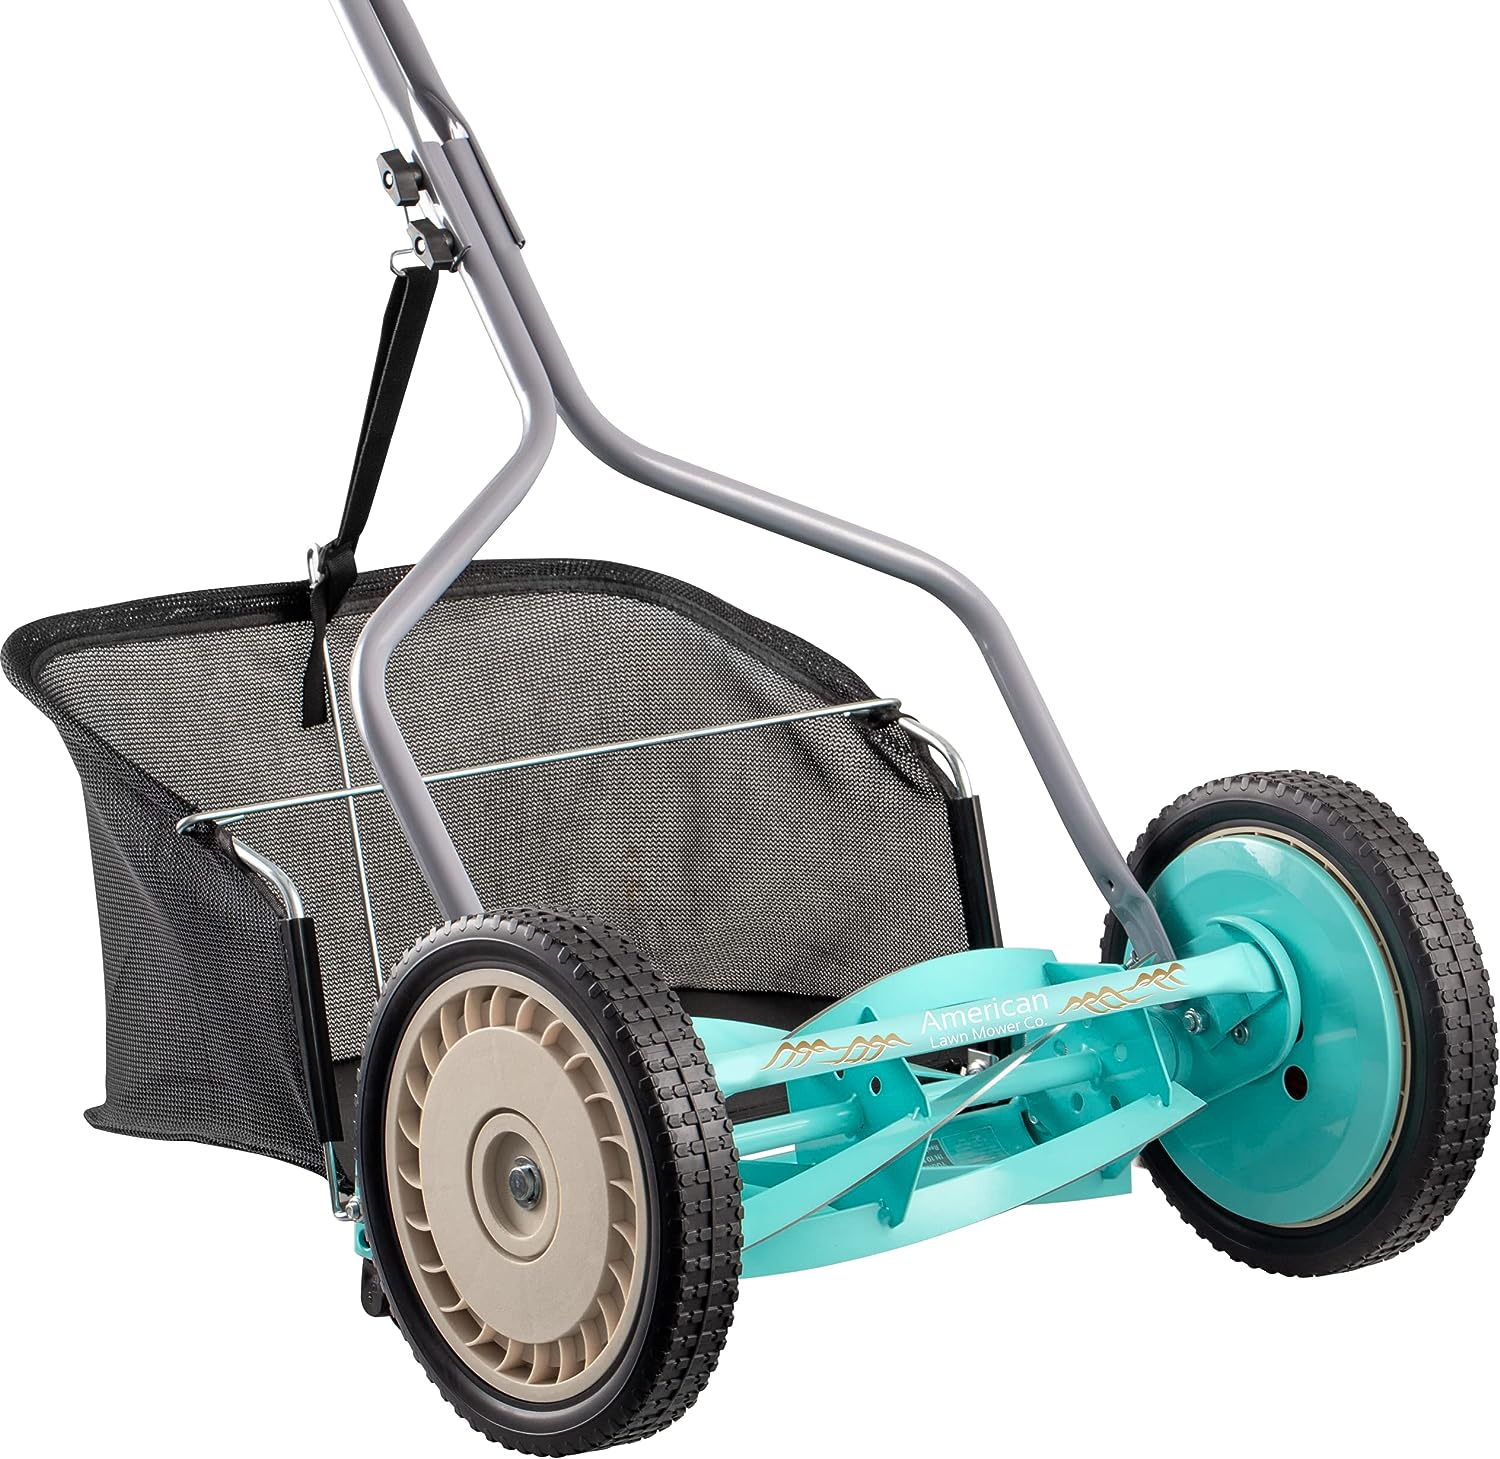 American Lawn Mower Company 1304-14GC 14-Inch 5-Blade Push Reel Lawn Mower with Grass Catcher, Mint